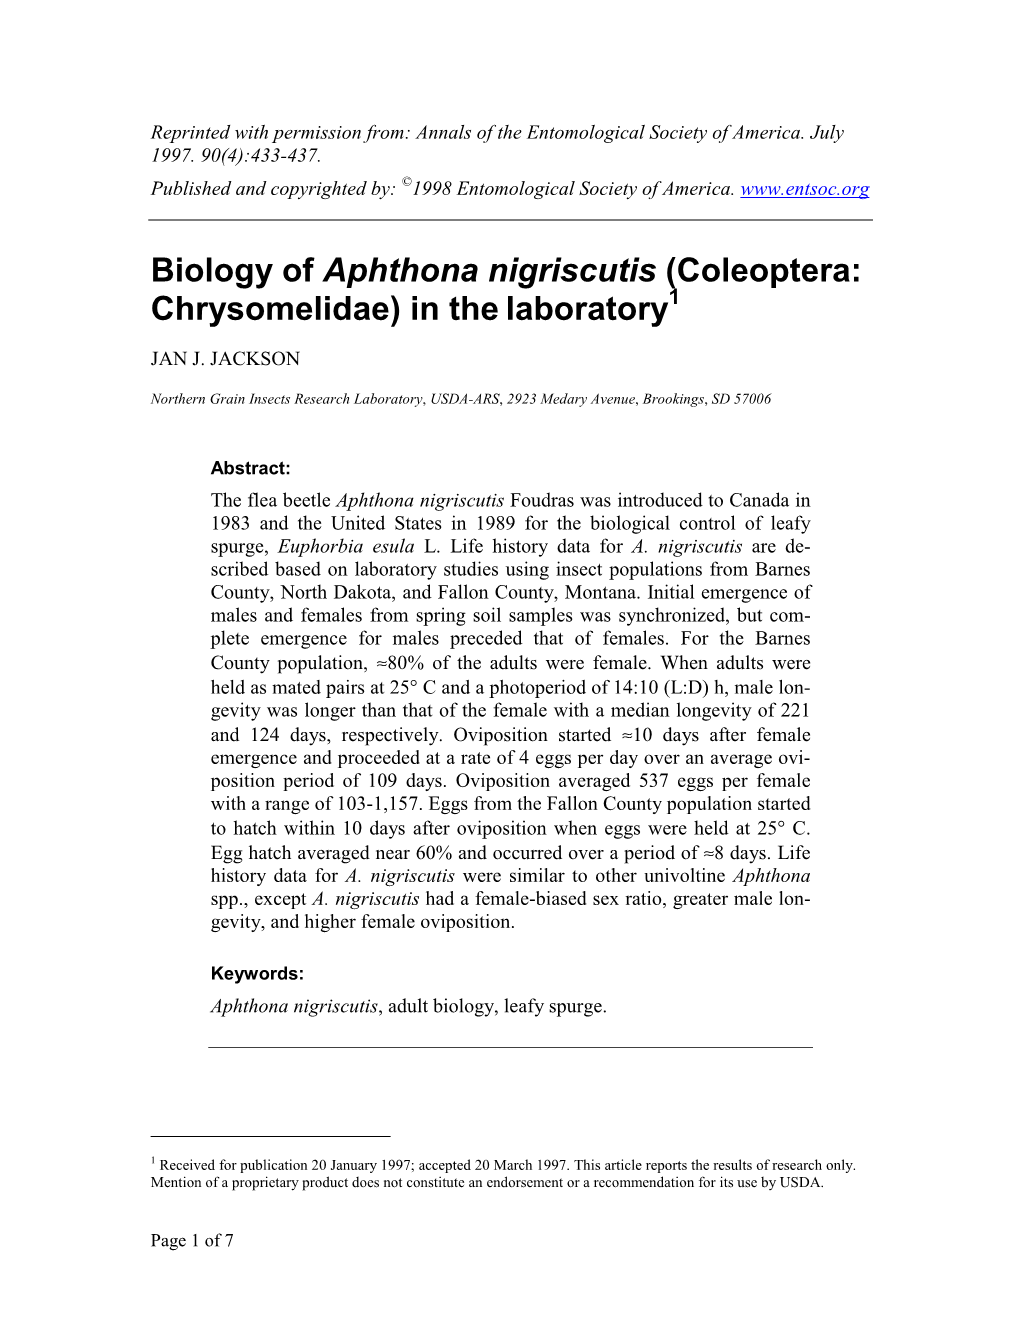 Biology of Aphthona Nigriscutis (Coleoptera: 1 Chrysomelidae) in the Laboratory